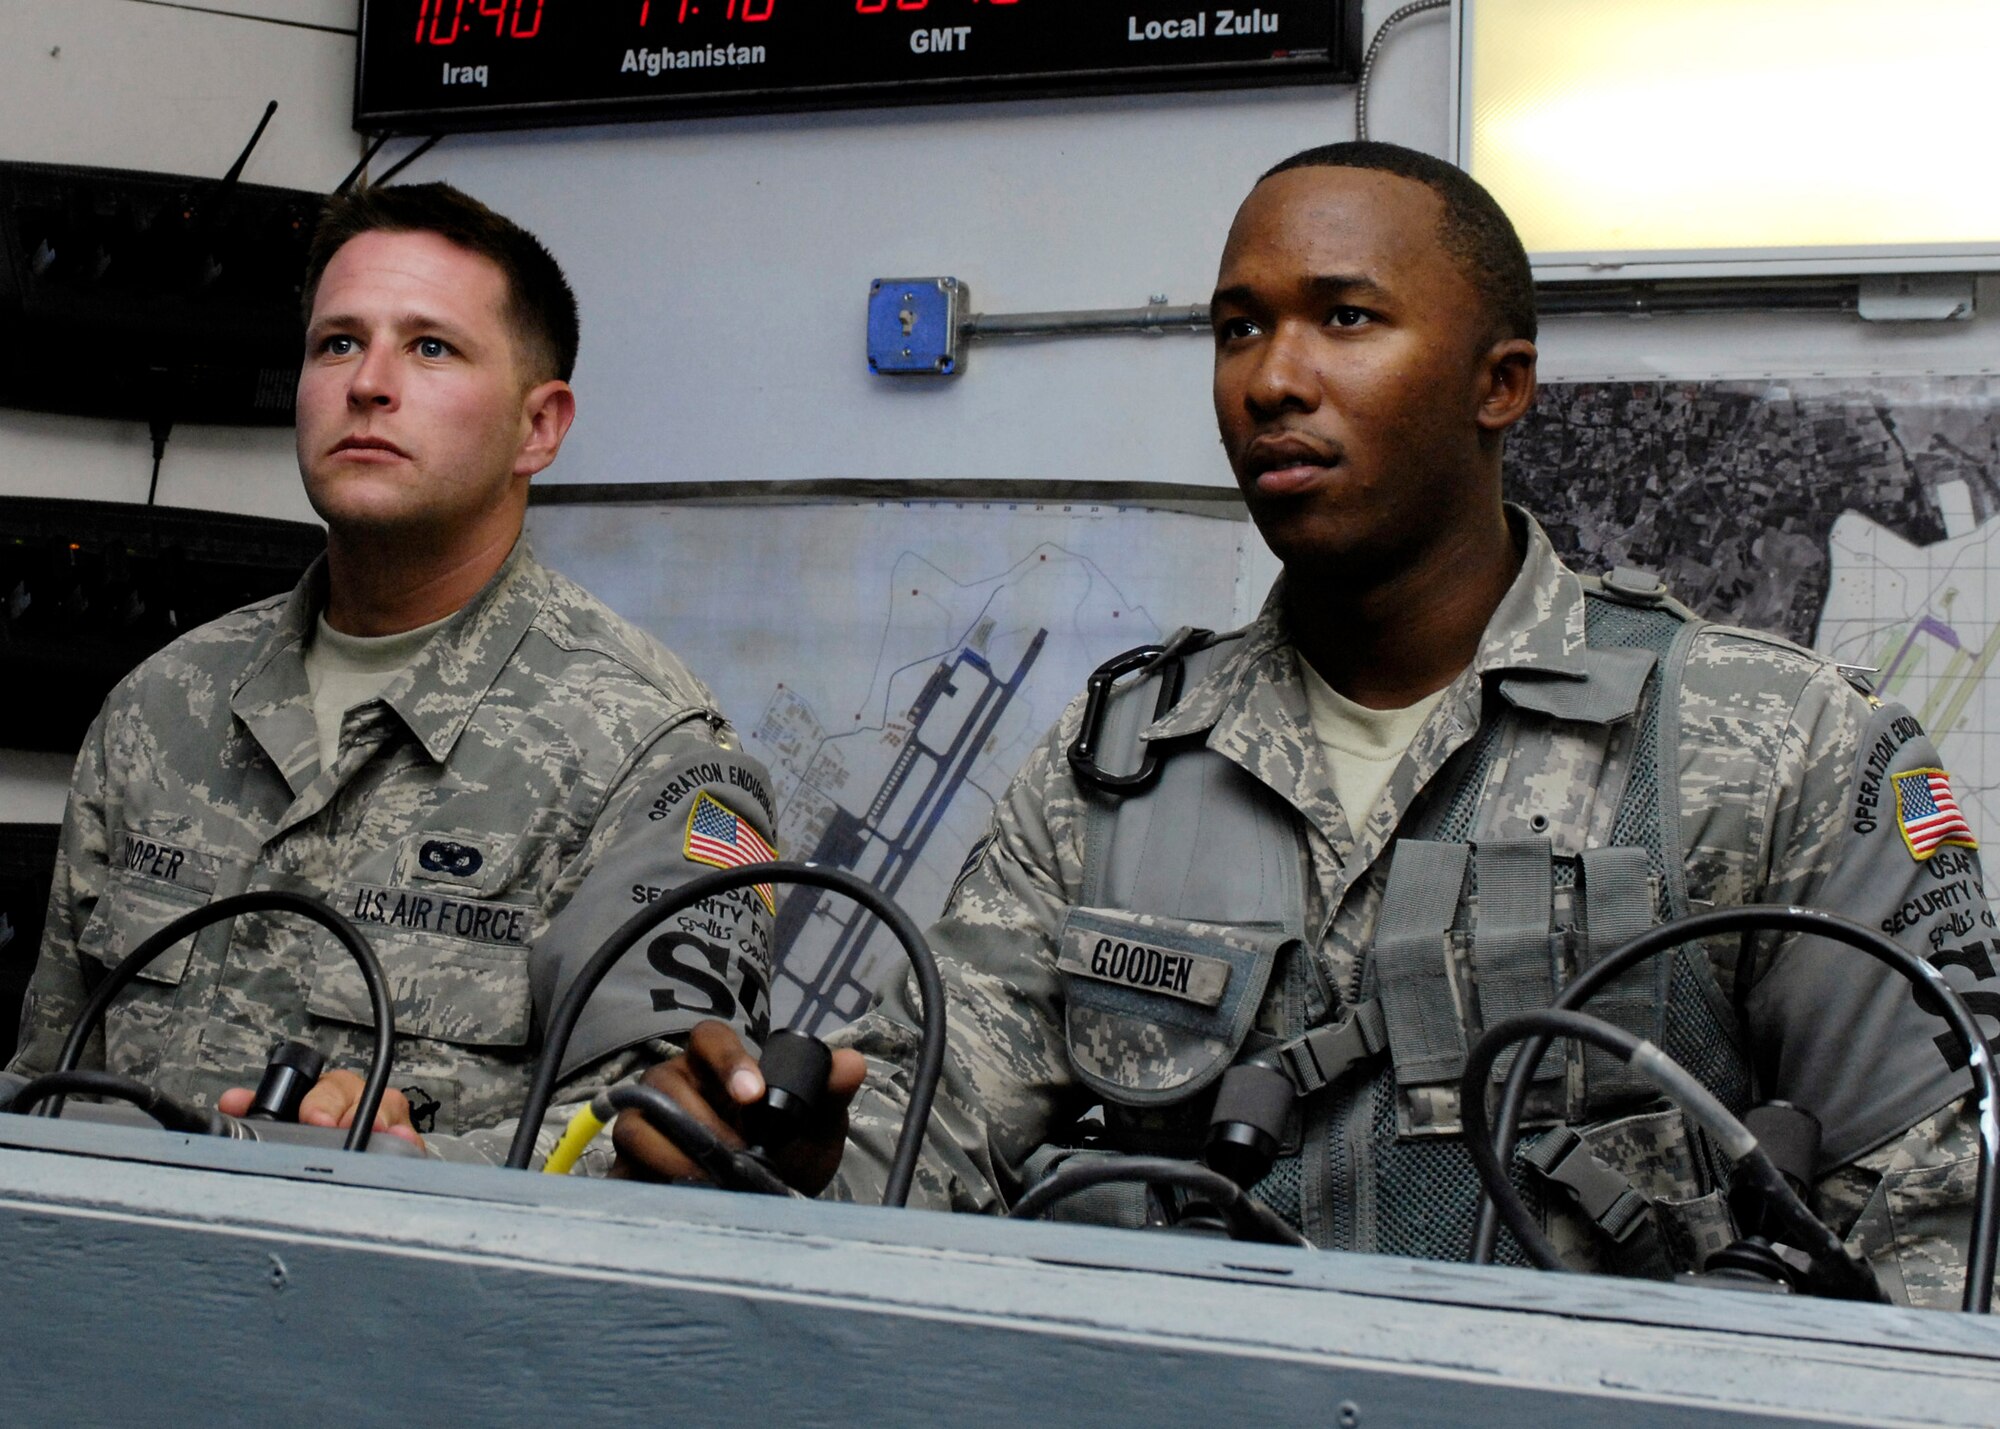 BAGRAM AIR FIELD, Afghanistan - Senior Airman Michael Cooper (left) and Airman 1st Class Jeremy Gooden, 455th Expeditionary Security Forces Squadron tactical automated sensor system controllers, monitor the flightline and perform visual assessments for alarm activations here June 5. Both members are deployed from the 355th Security Forces Squadron, Davis-Monthan Air Force Base, Ariz. (U.S. Air Force photo by Master Sgt. Demetrius Lester)